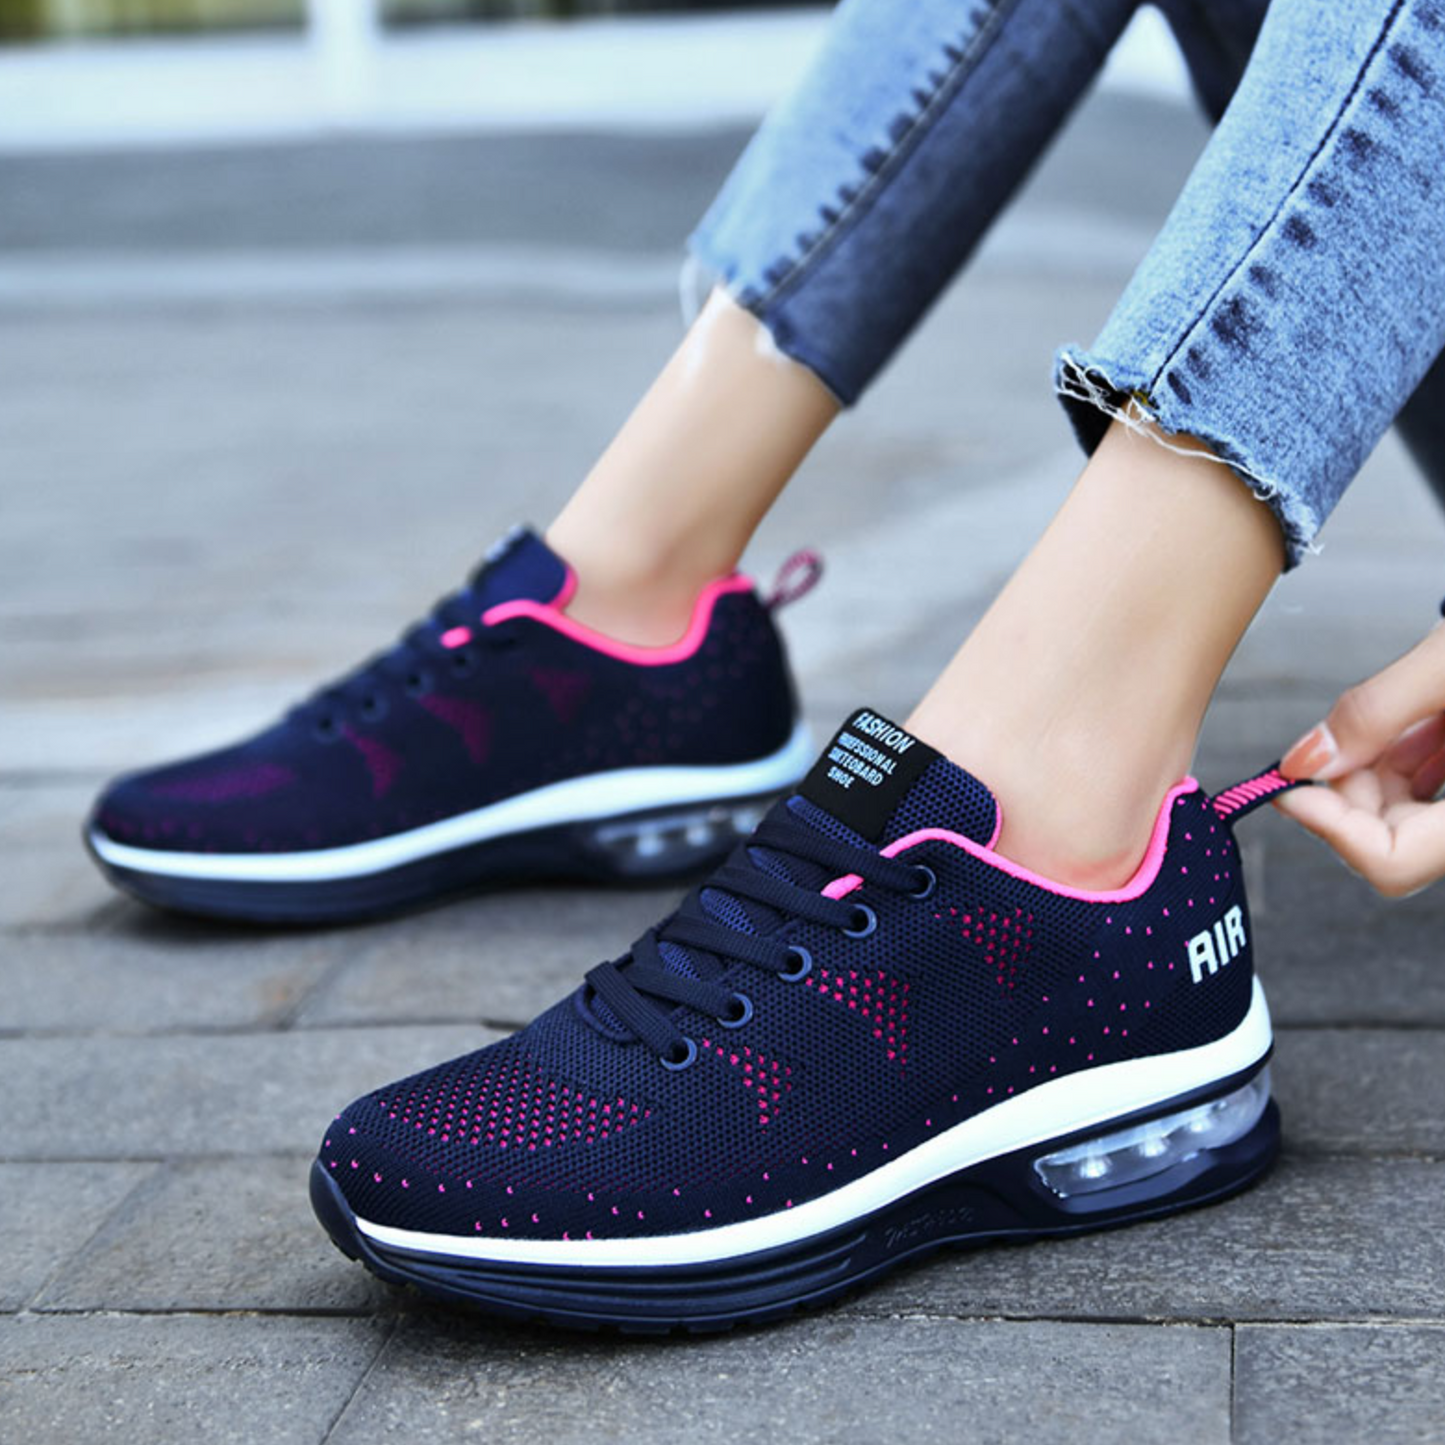 2022 Women's Comfy Air Cushion Sneakers, Breathable Shoes Walking Running Shoes [Limited time offer: Buy 2 Save More 15%]